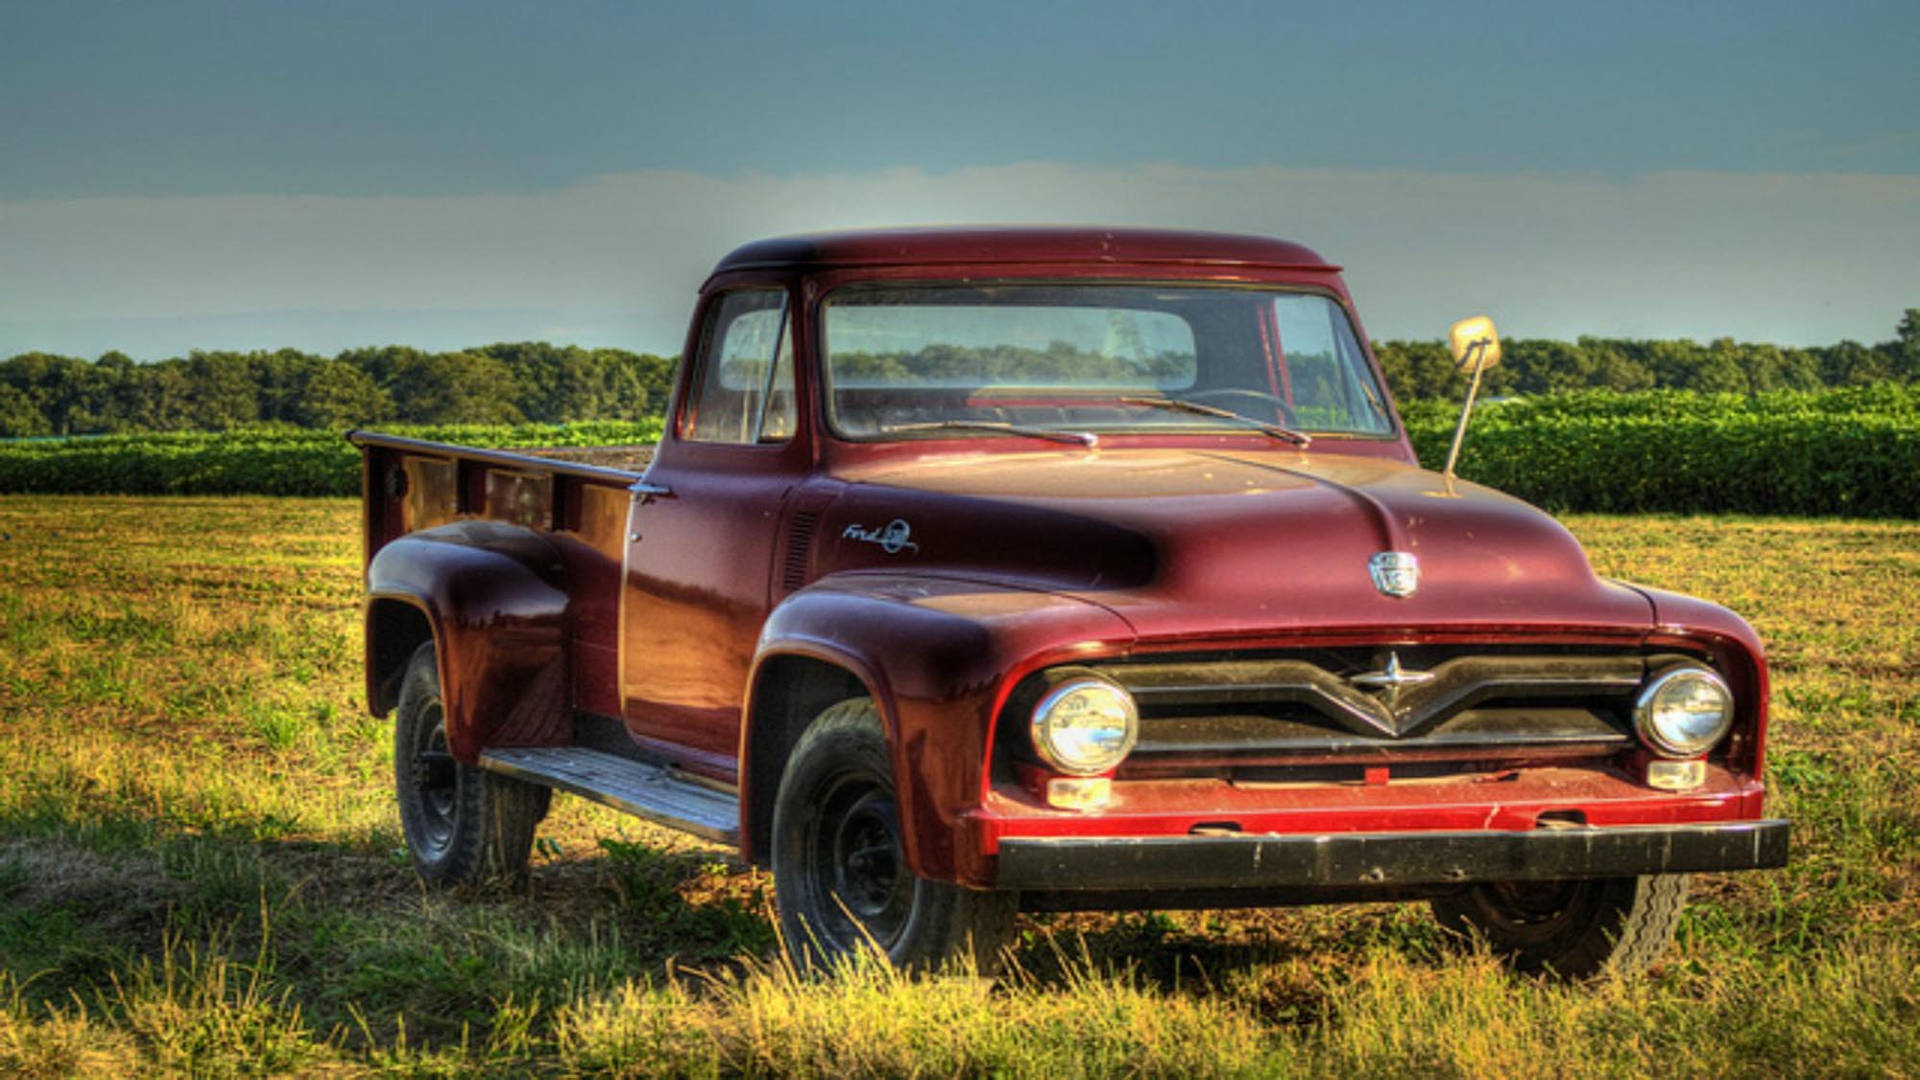 1953 Red Old Ford Truck Background